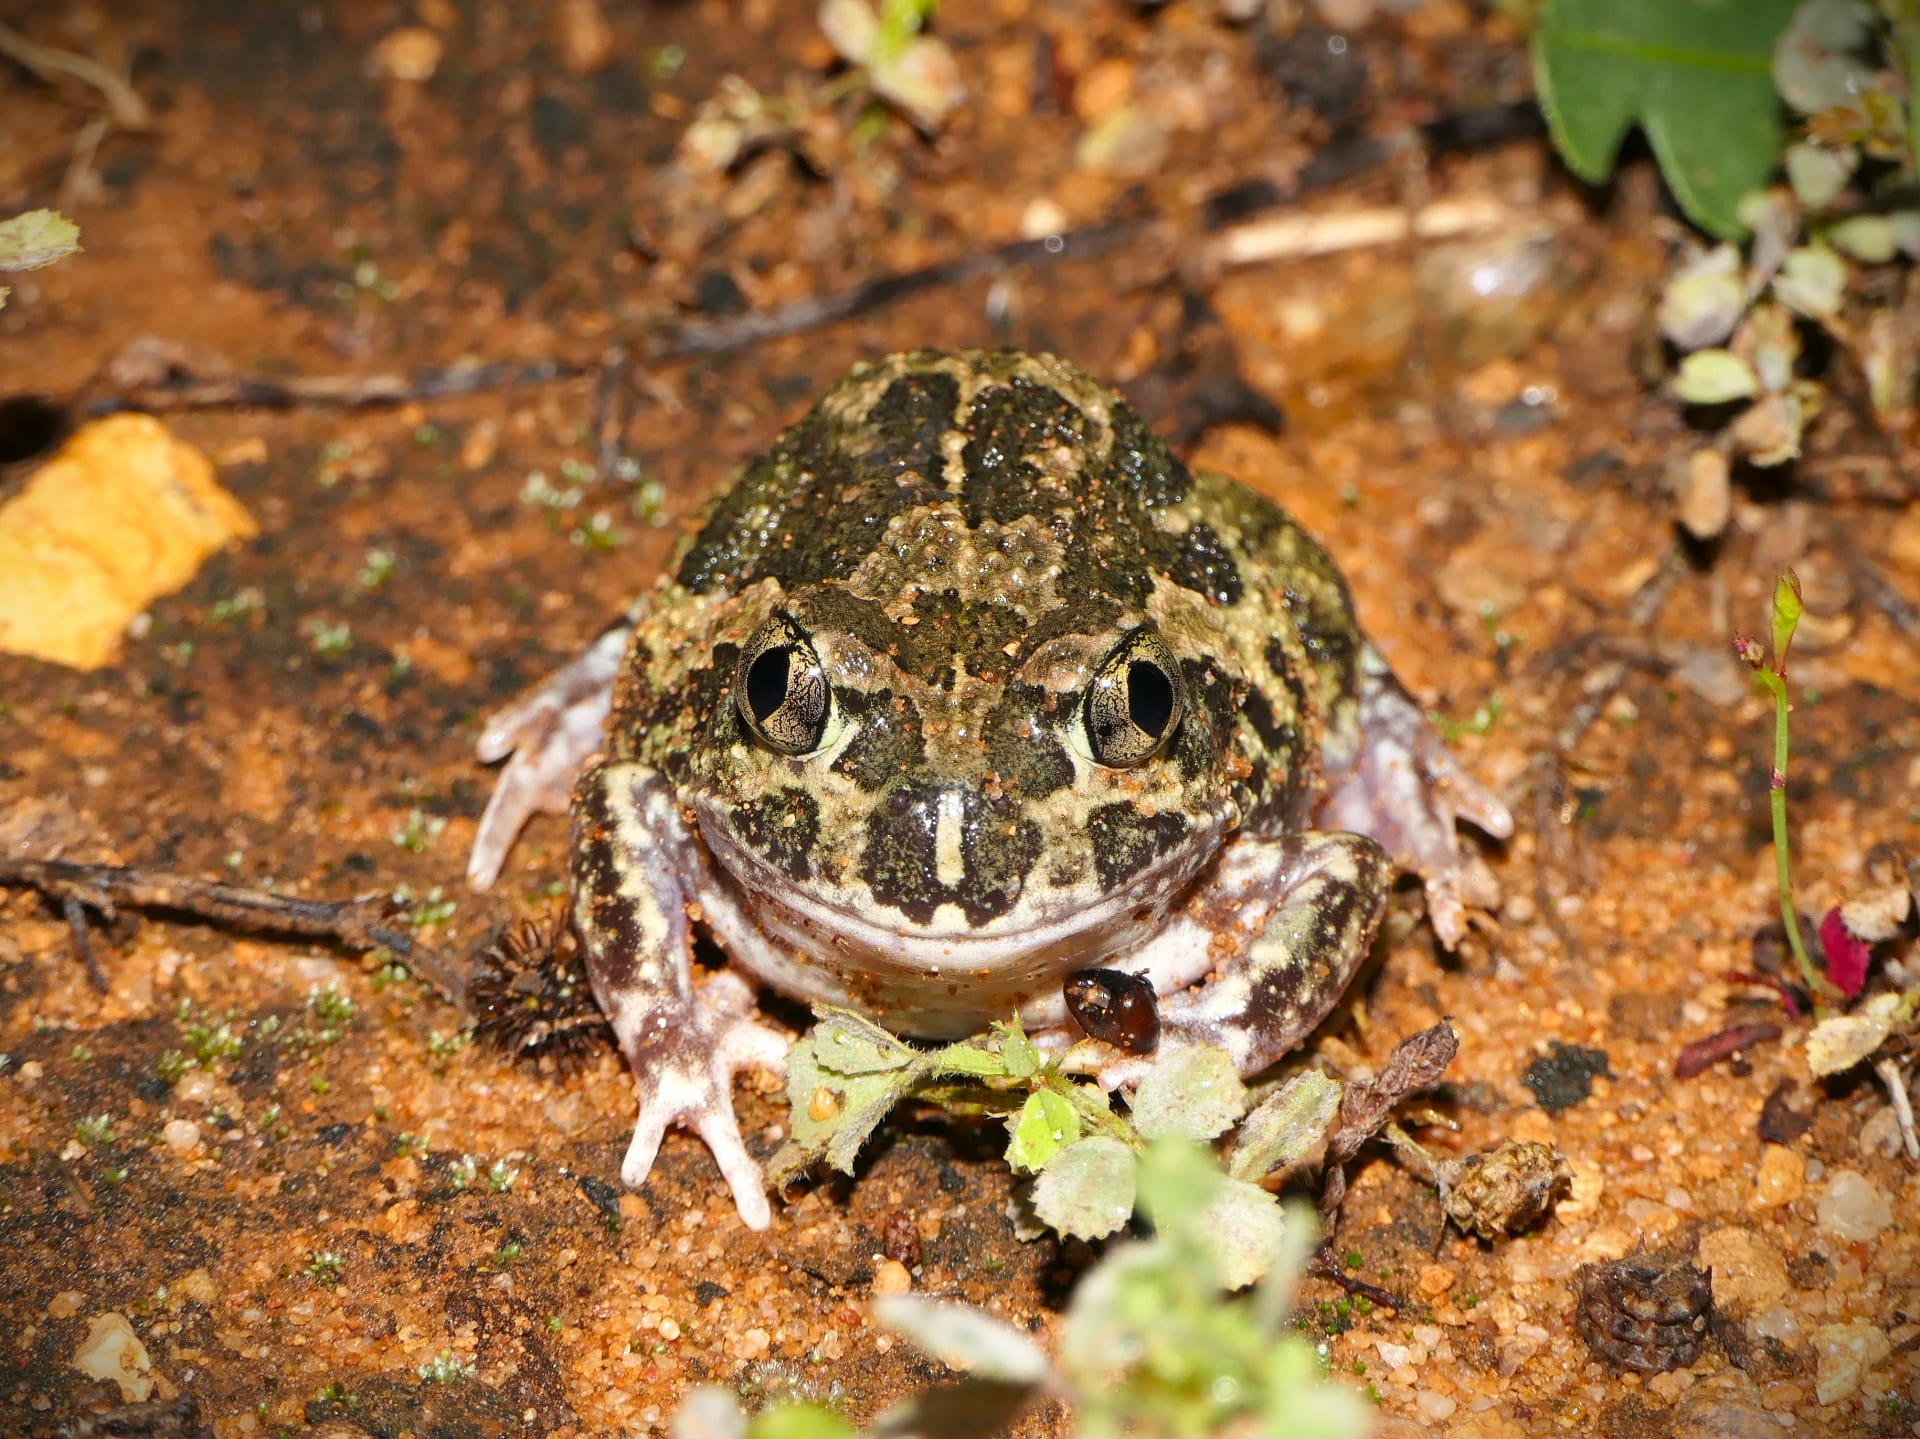 Getting up and close with a Spadefoot Toad (Scaphiopodidae) at Yarrara Flora and Fauna Reserve